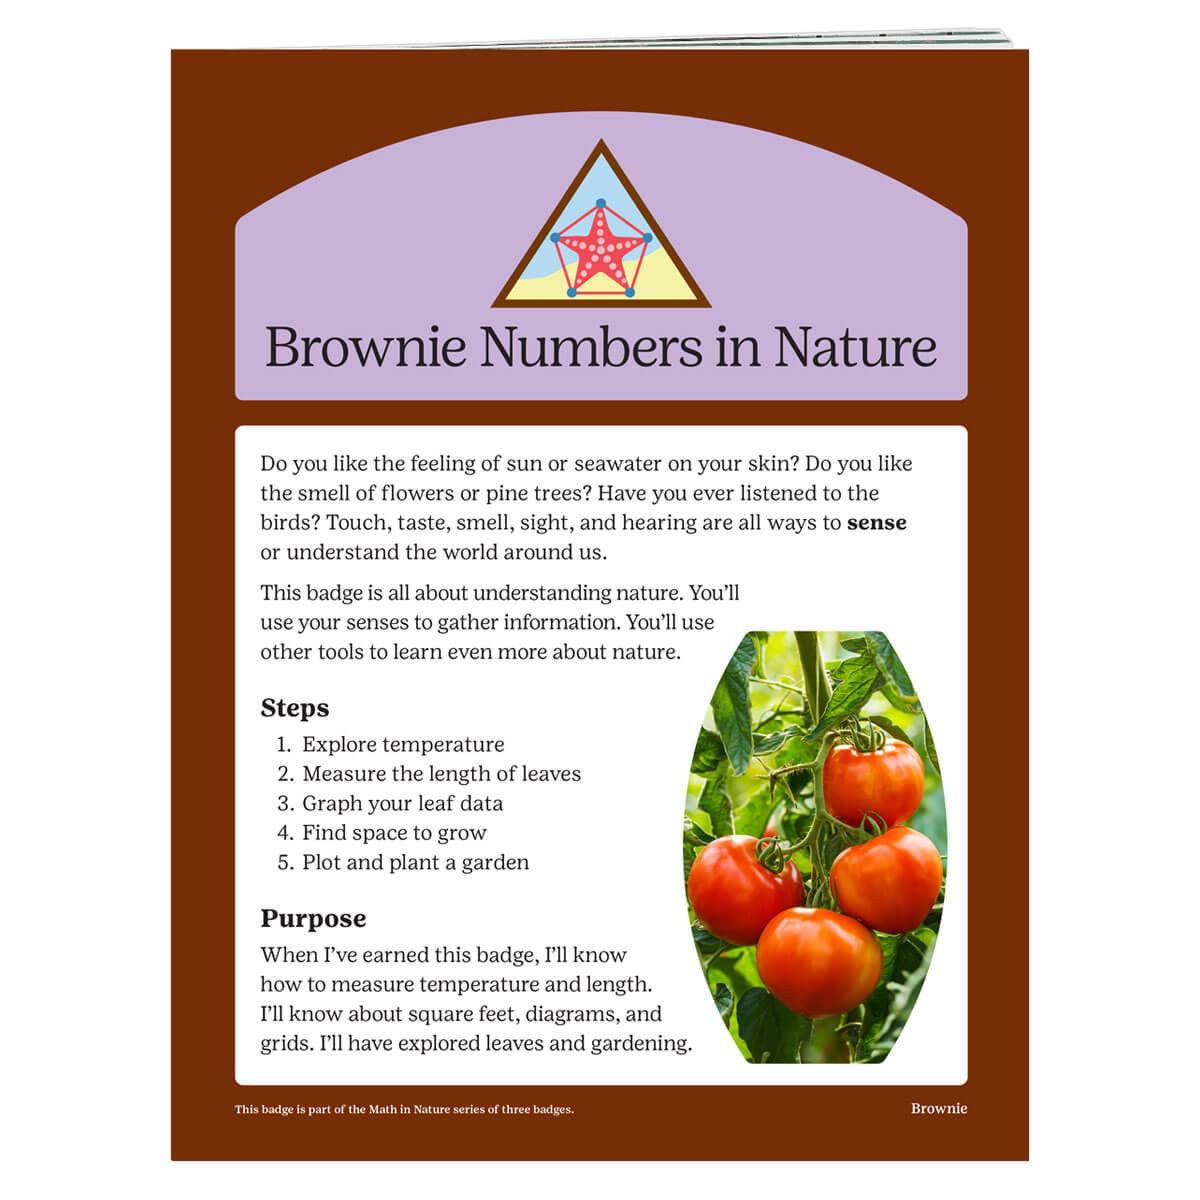 Brownie Numbers in Nature Badge Requirements